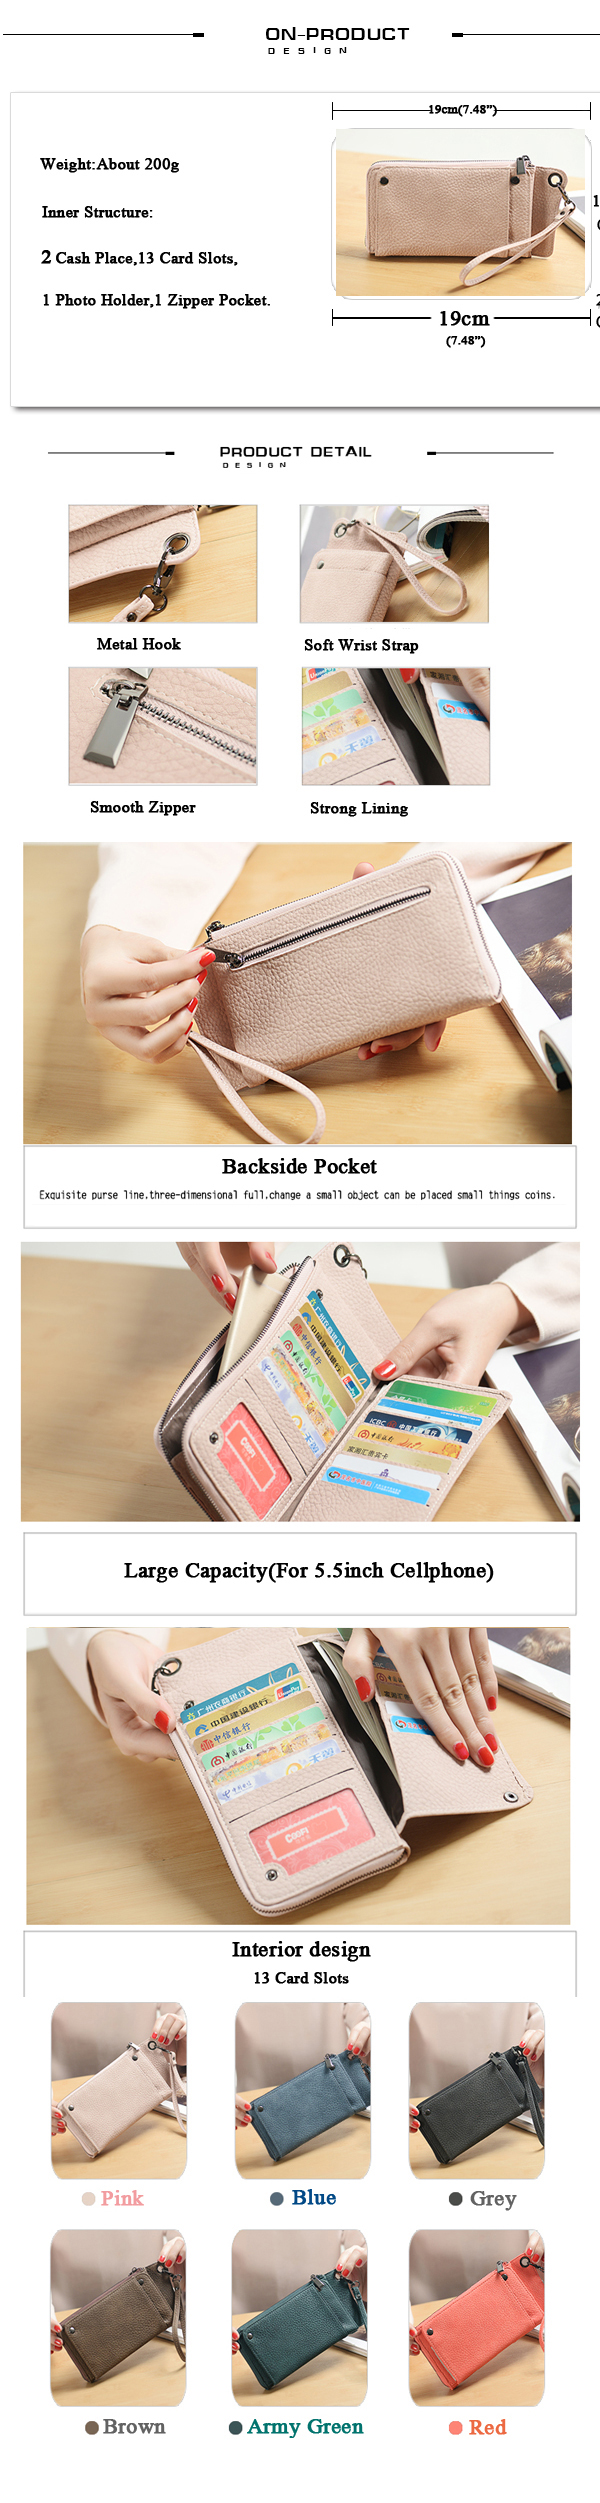 13-Card-Slots-Women-Large-Capacity-Pu--Wallet-Cell-Phone-Case-1115323